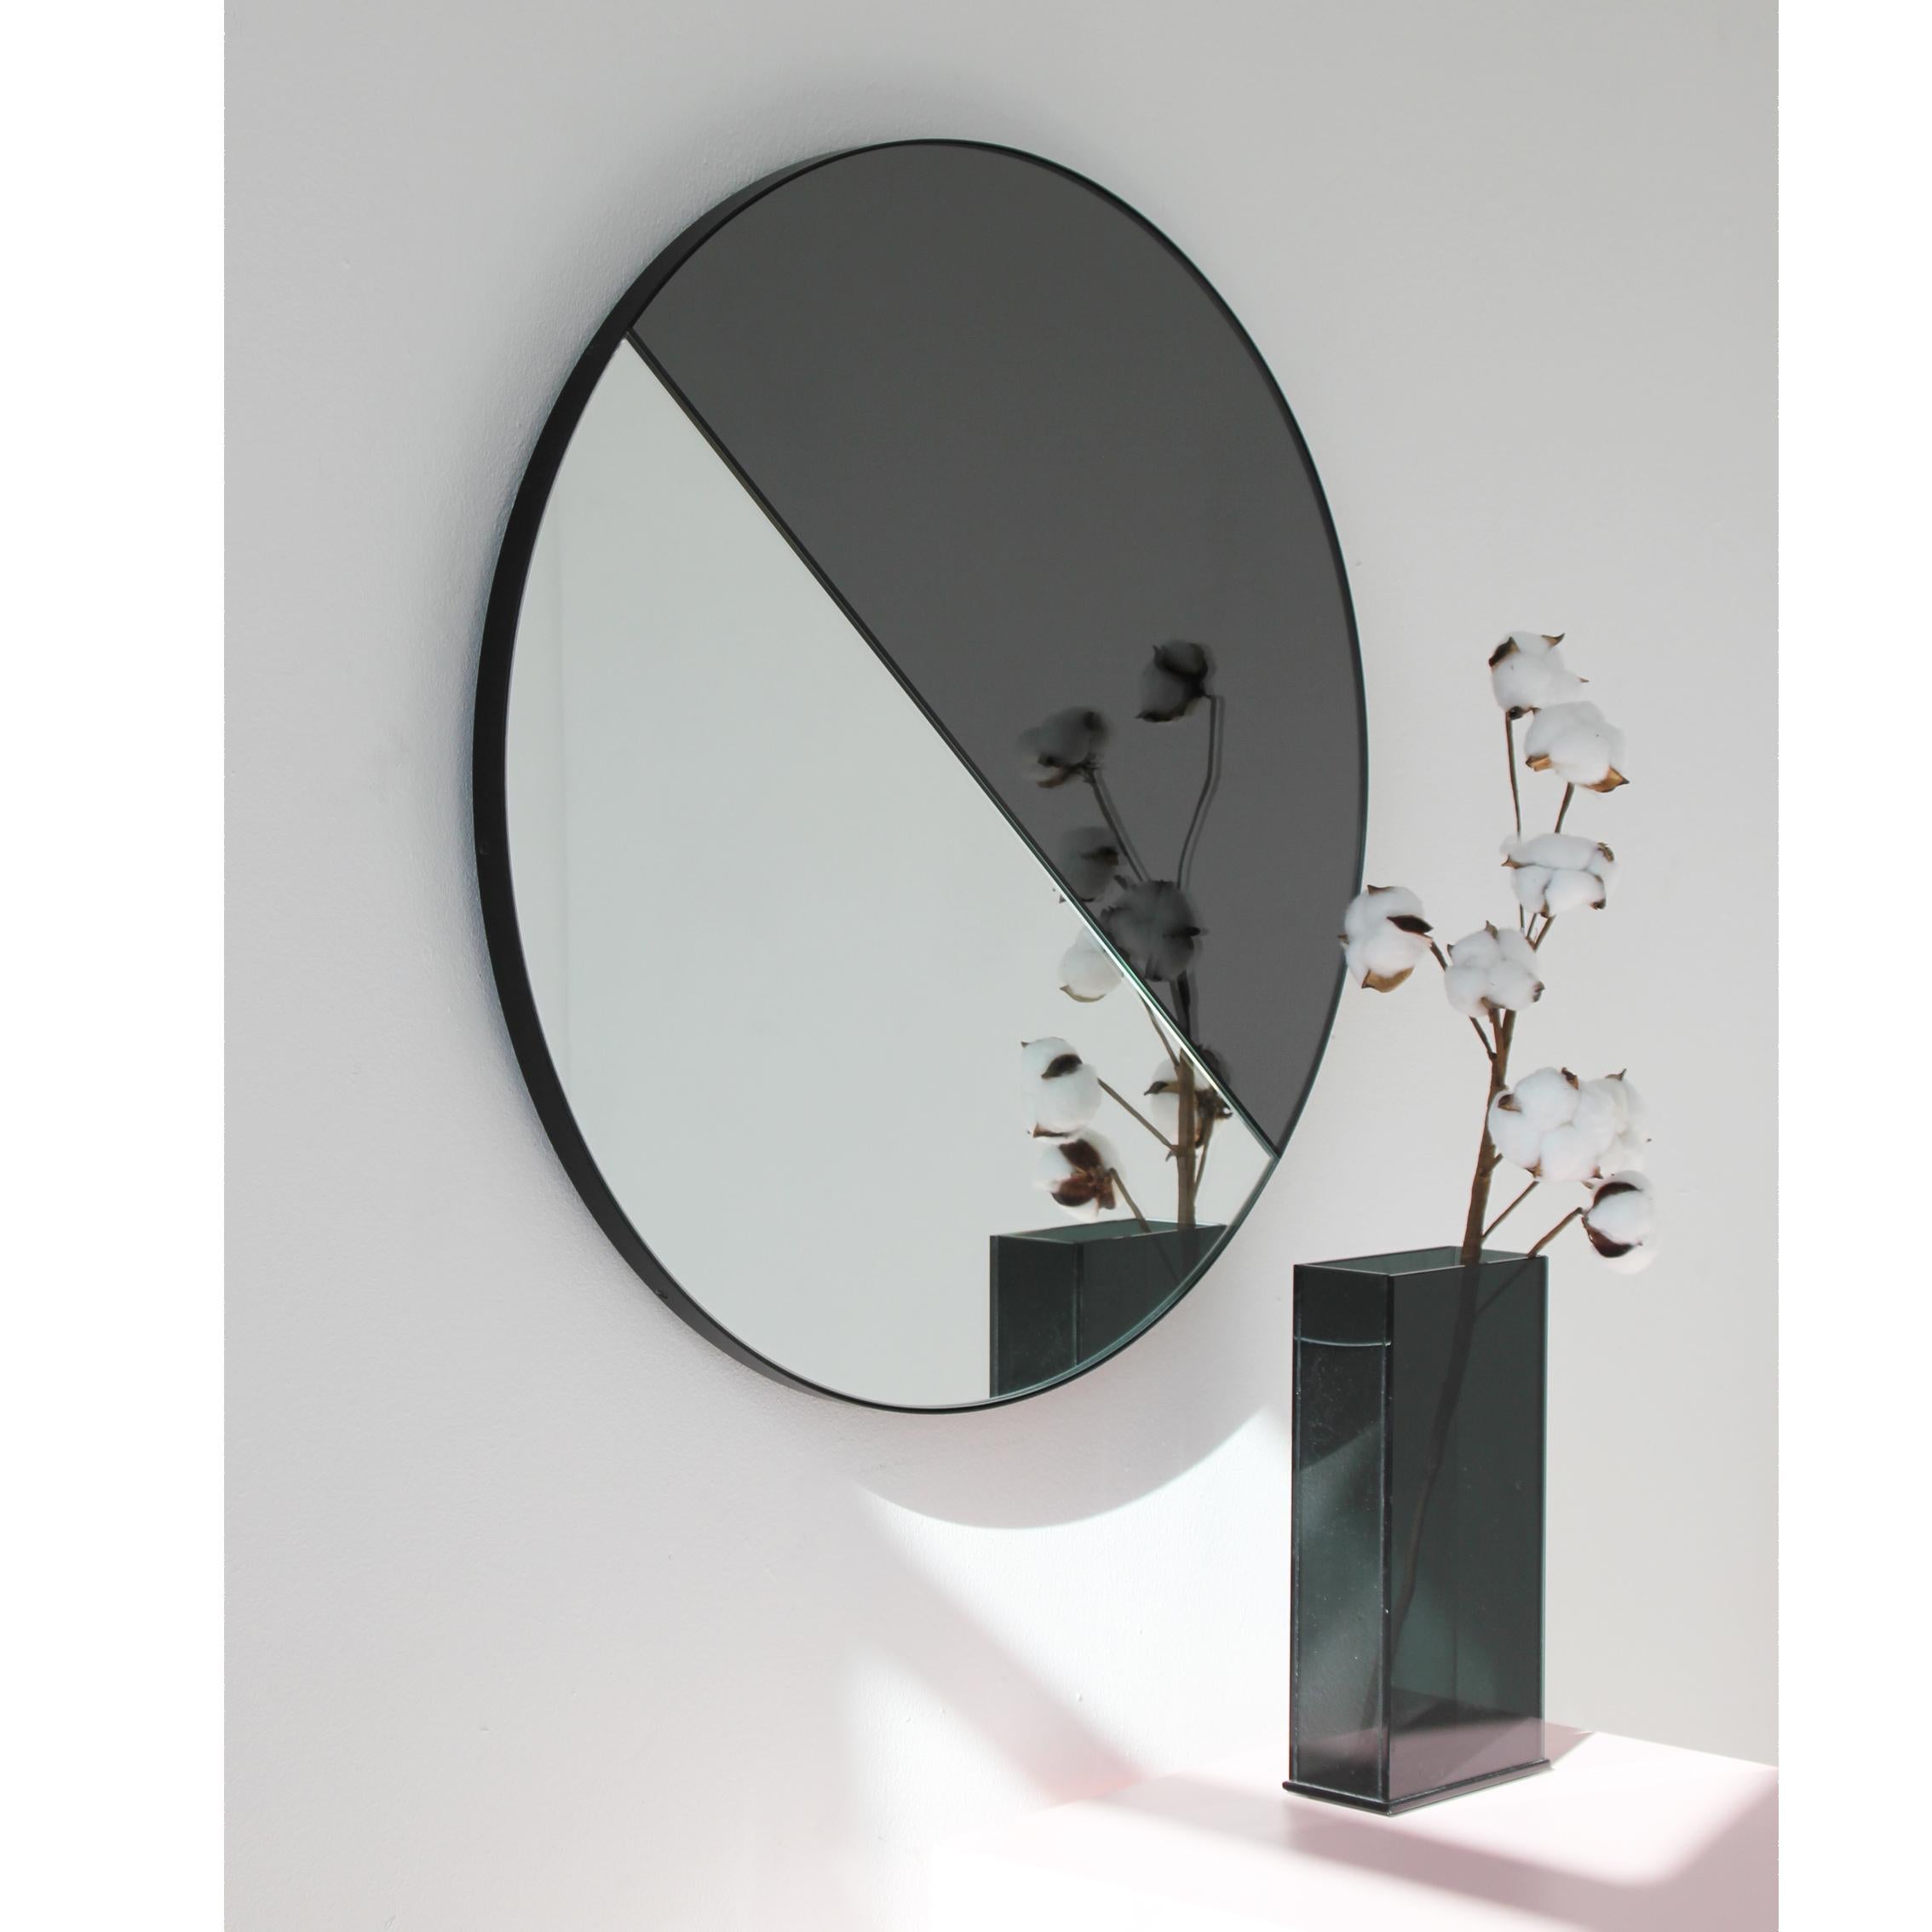 Organic Modern Orbis Dualis Mixed Tint Contemporary Round Mirror with Black Frame, Large For Sale